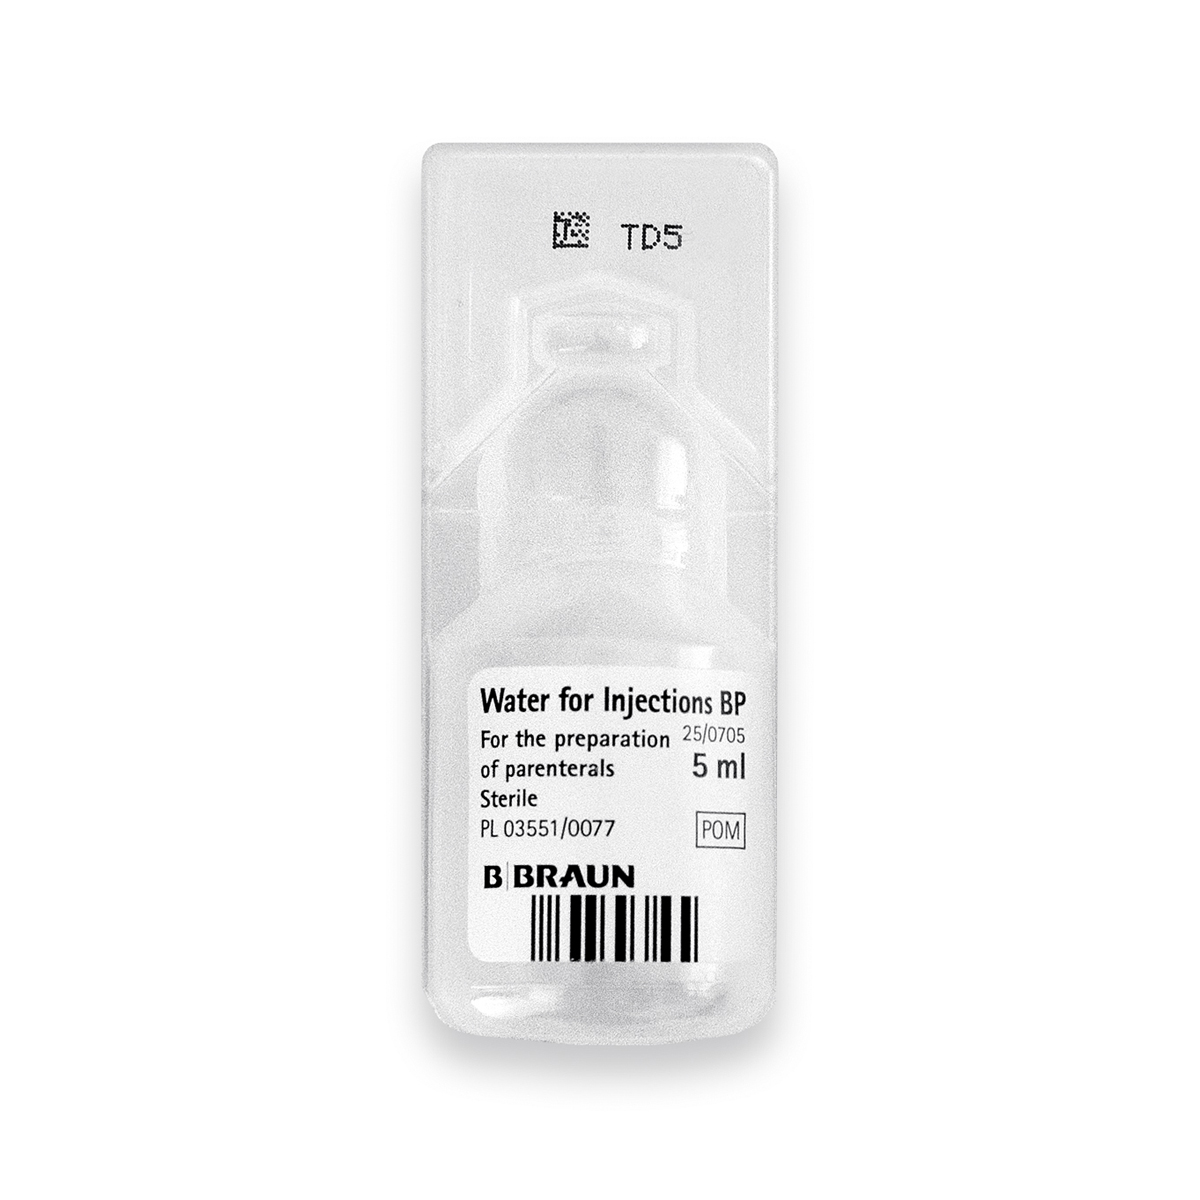 5ml Water for Injection plastic ampoule (temp out of stock)